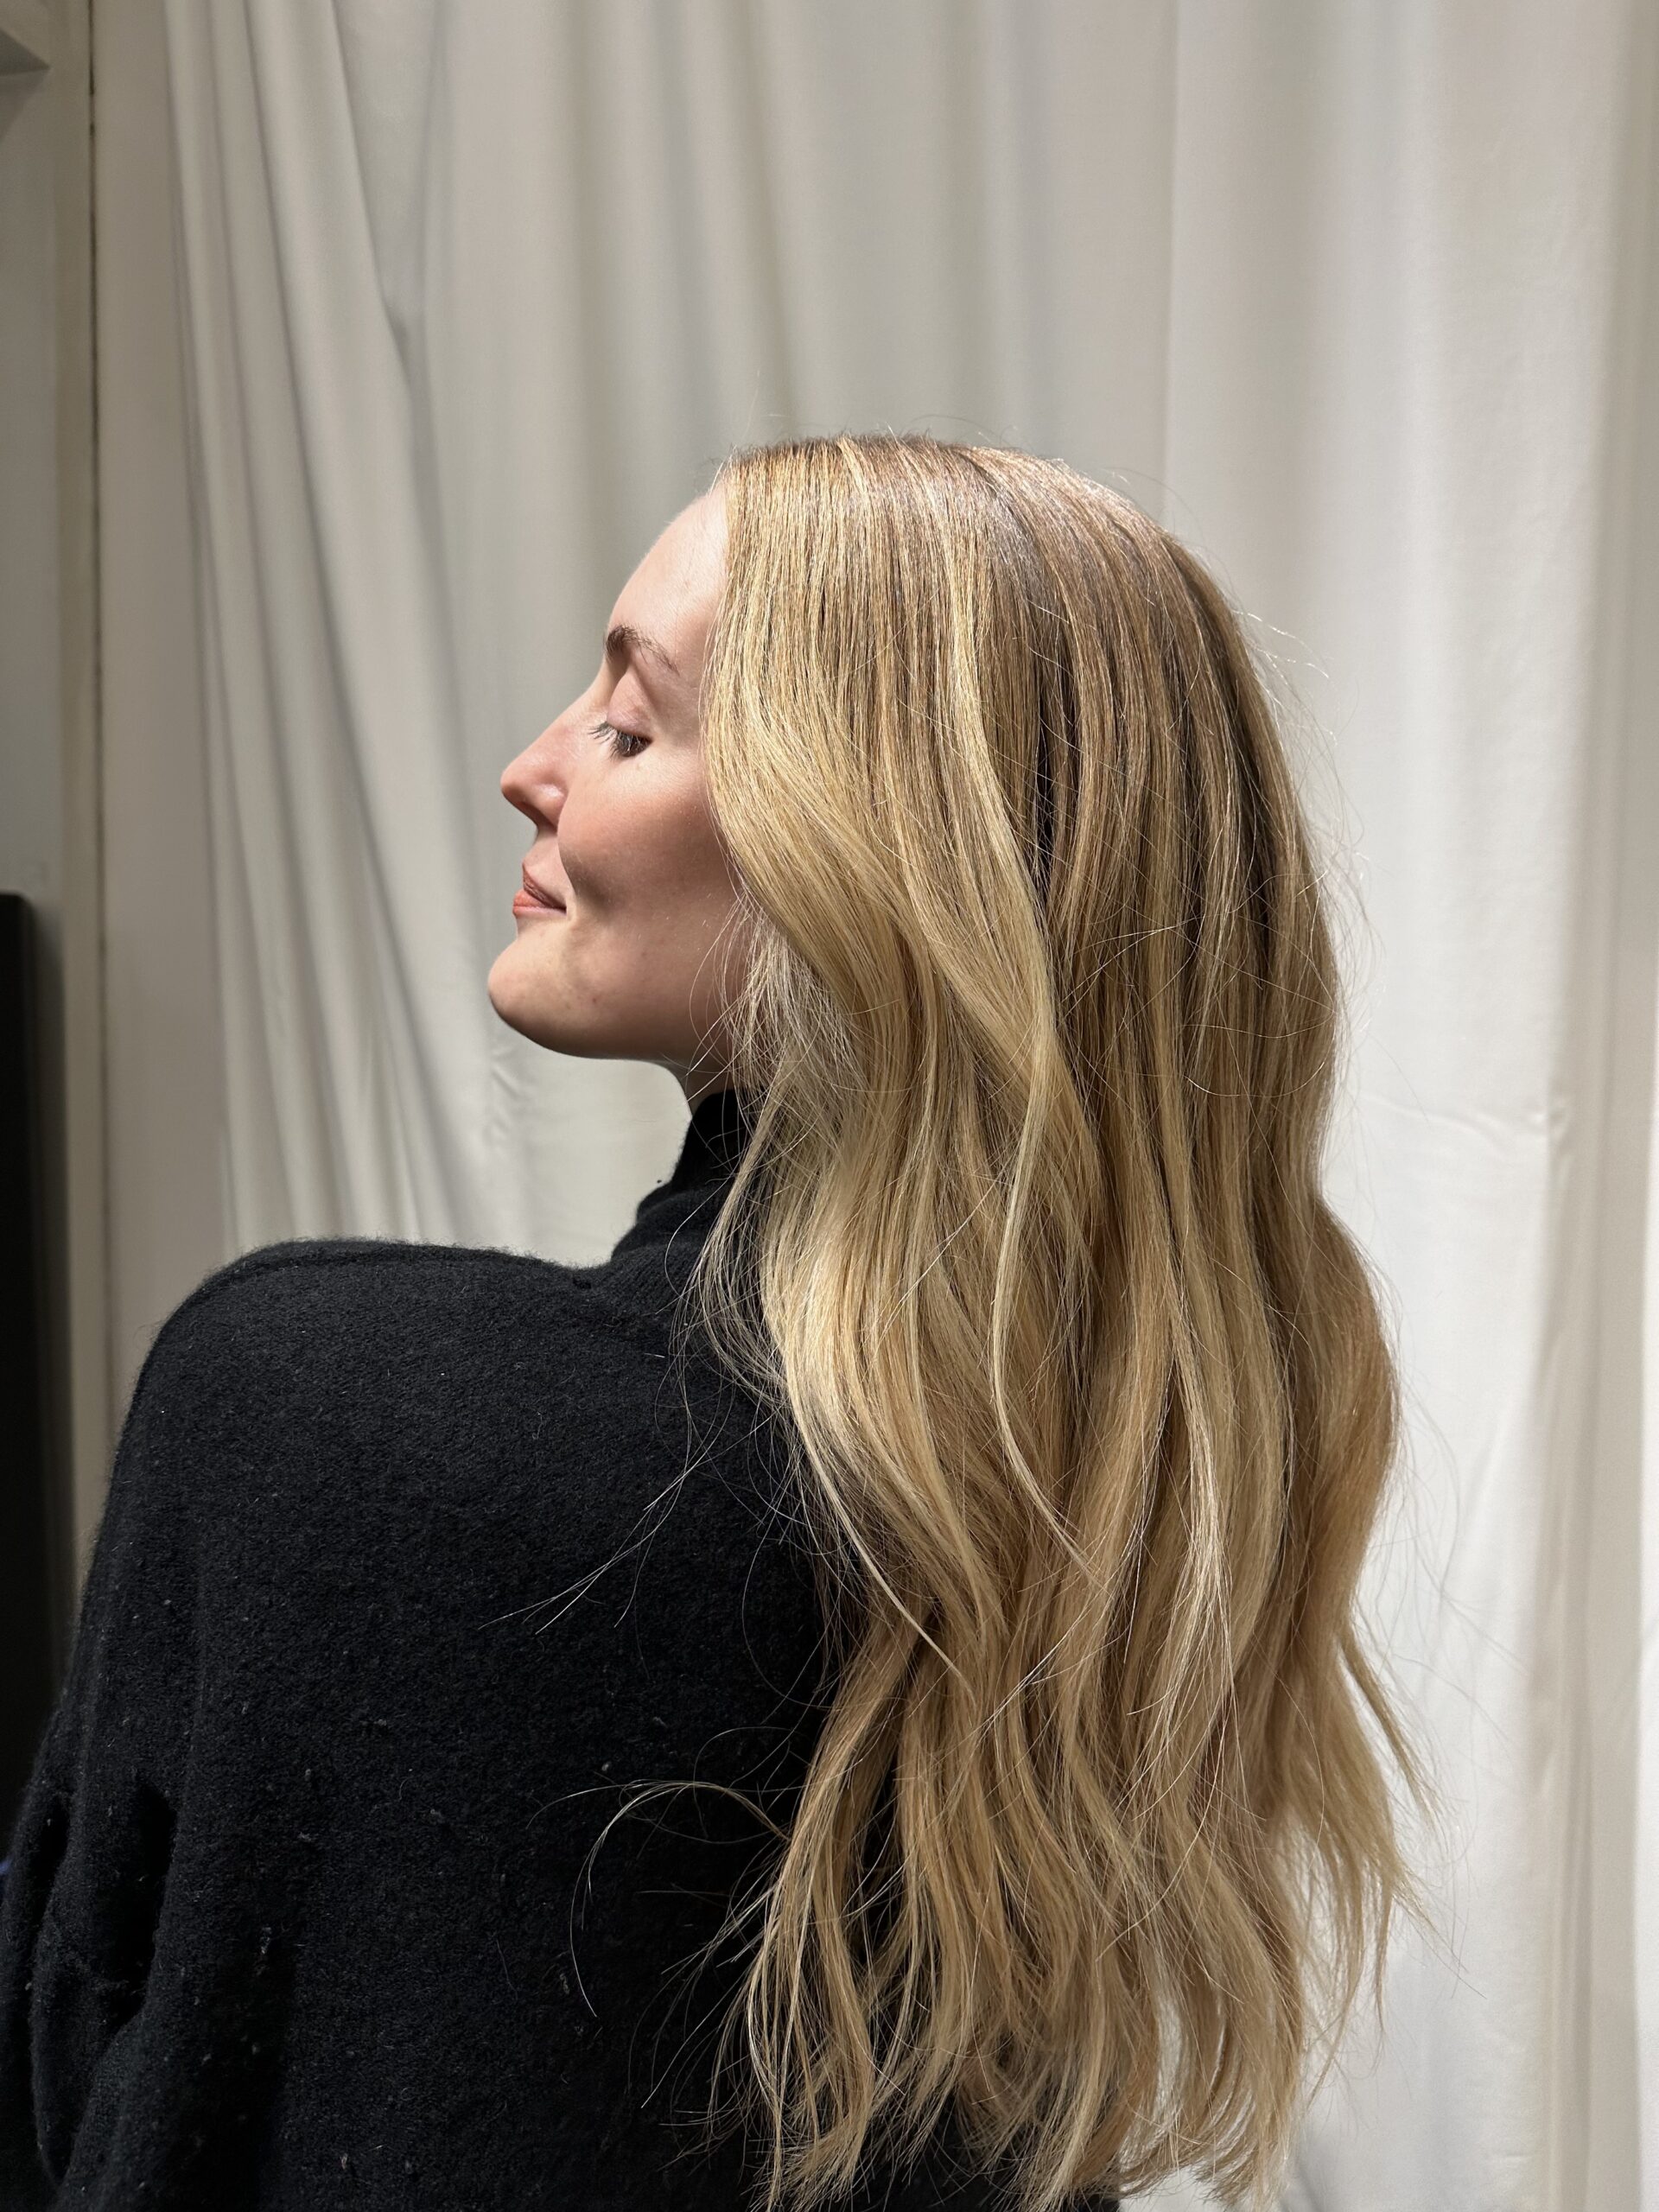 Side Profile View of Woman with Long Blonde Hair